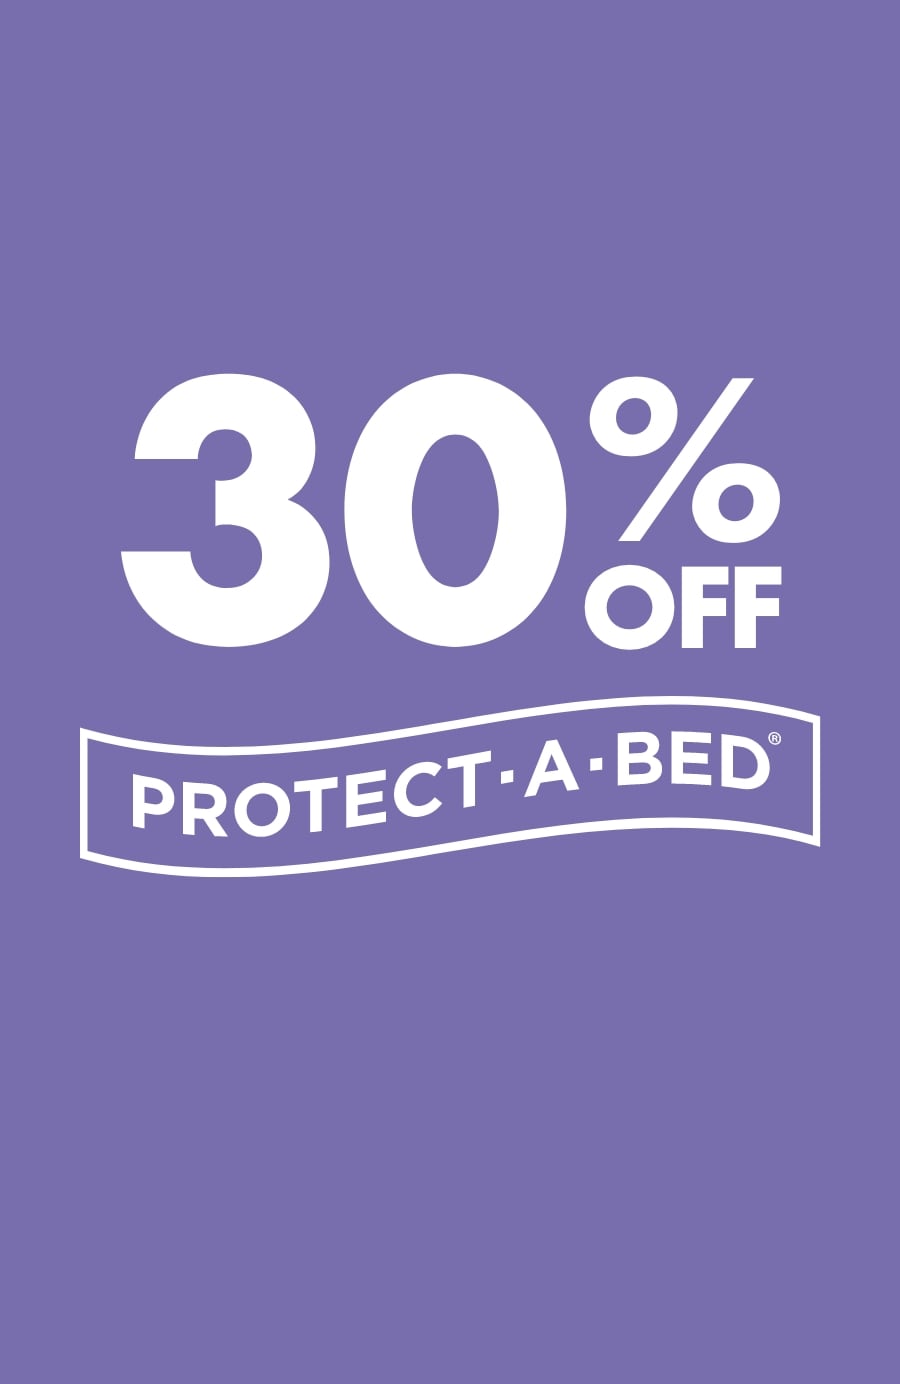 30% OFF Protect-A-Bed